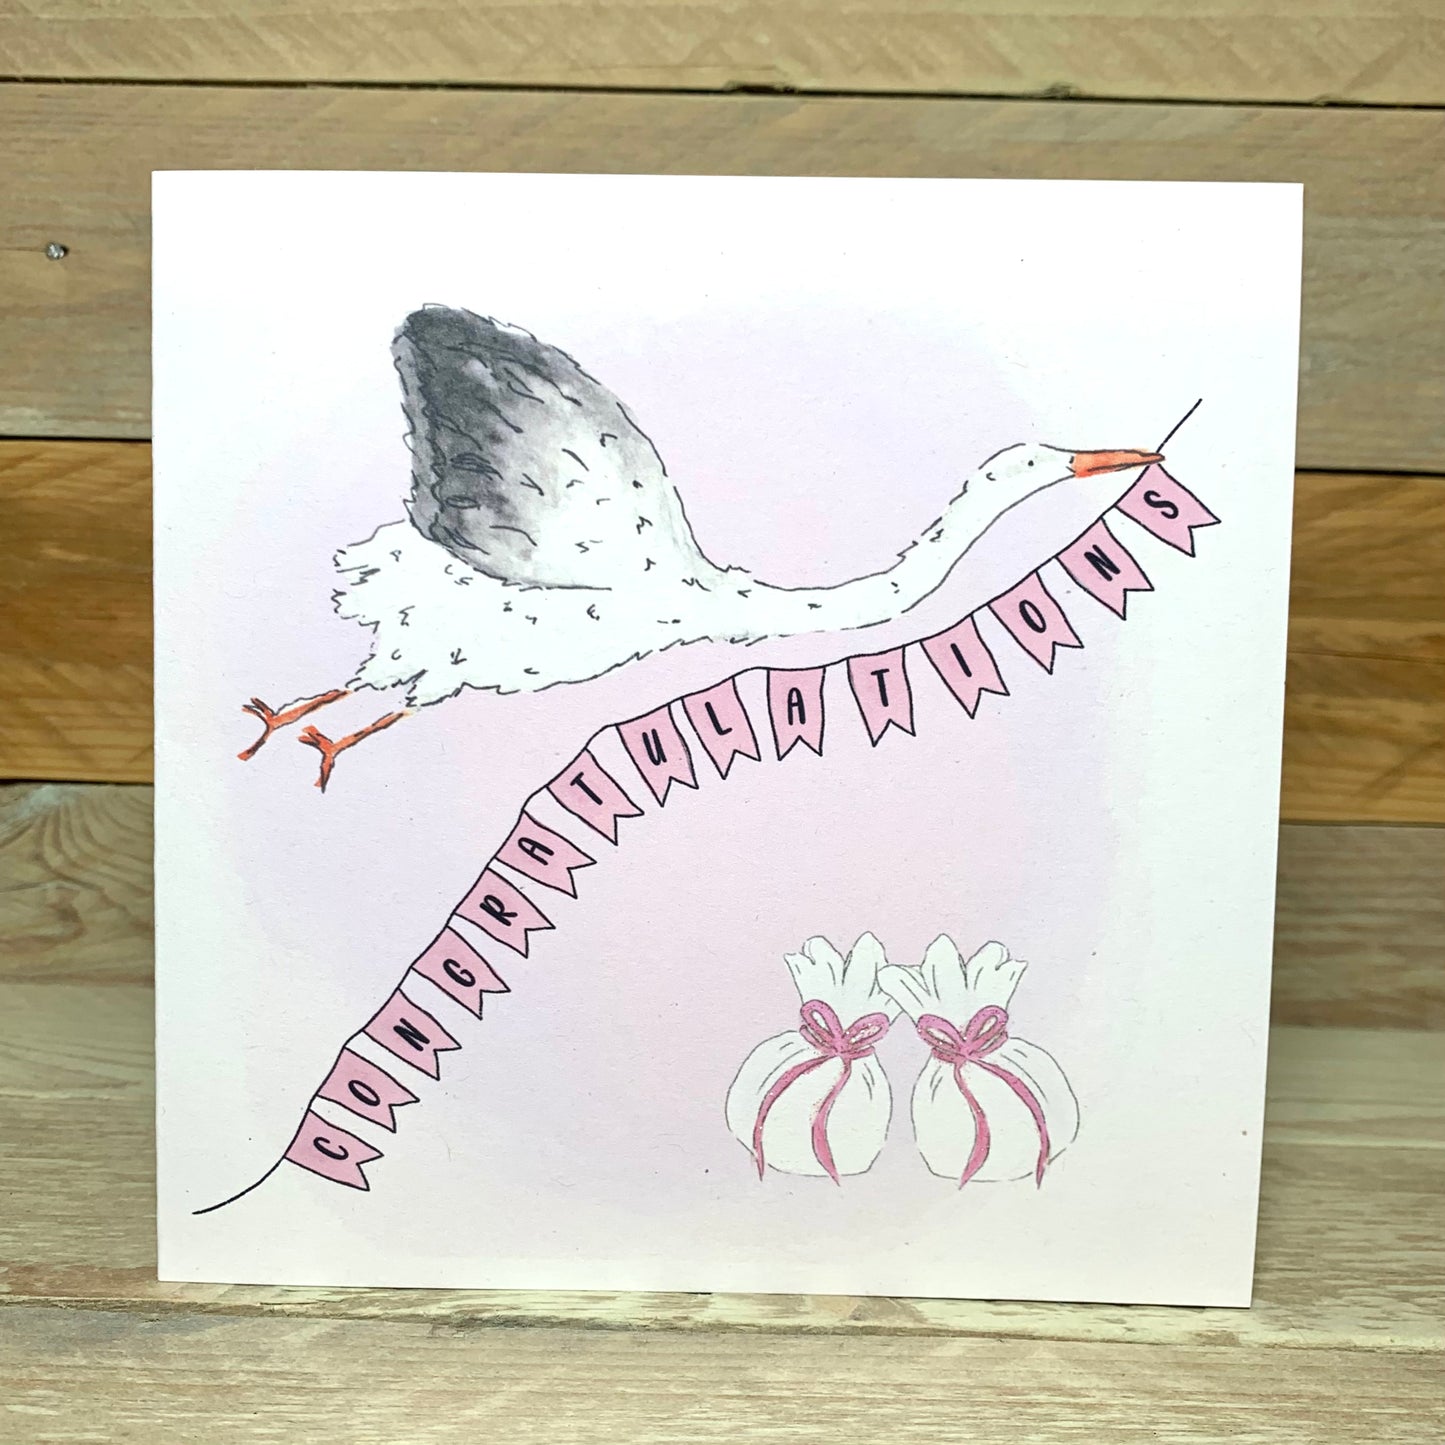 Special Delivery New Baby Twins Pink Card